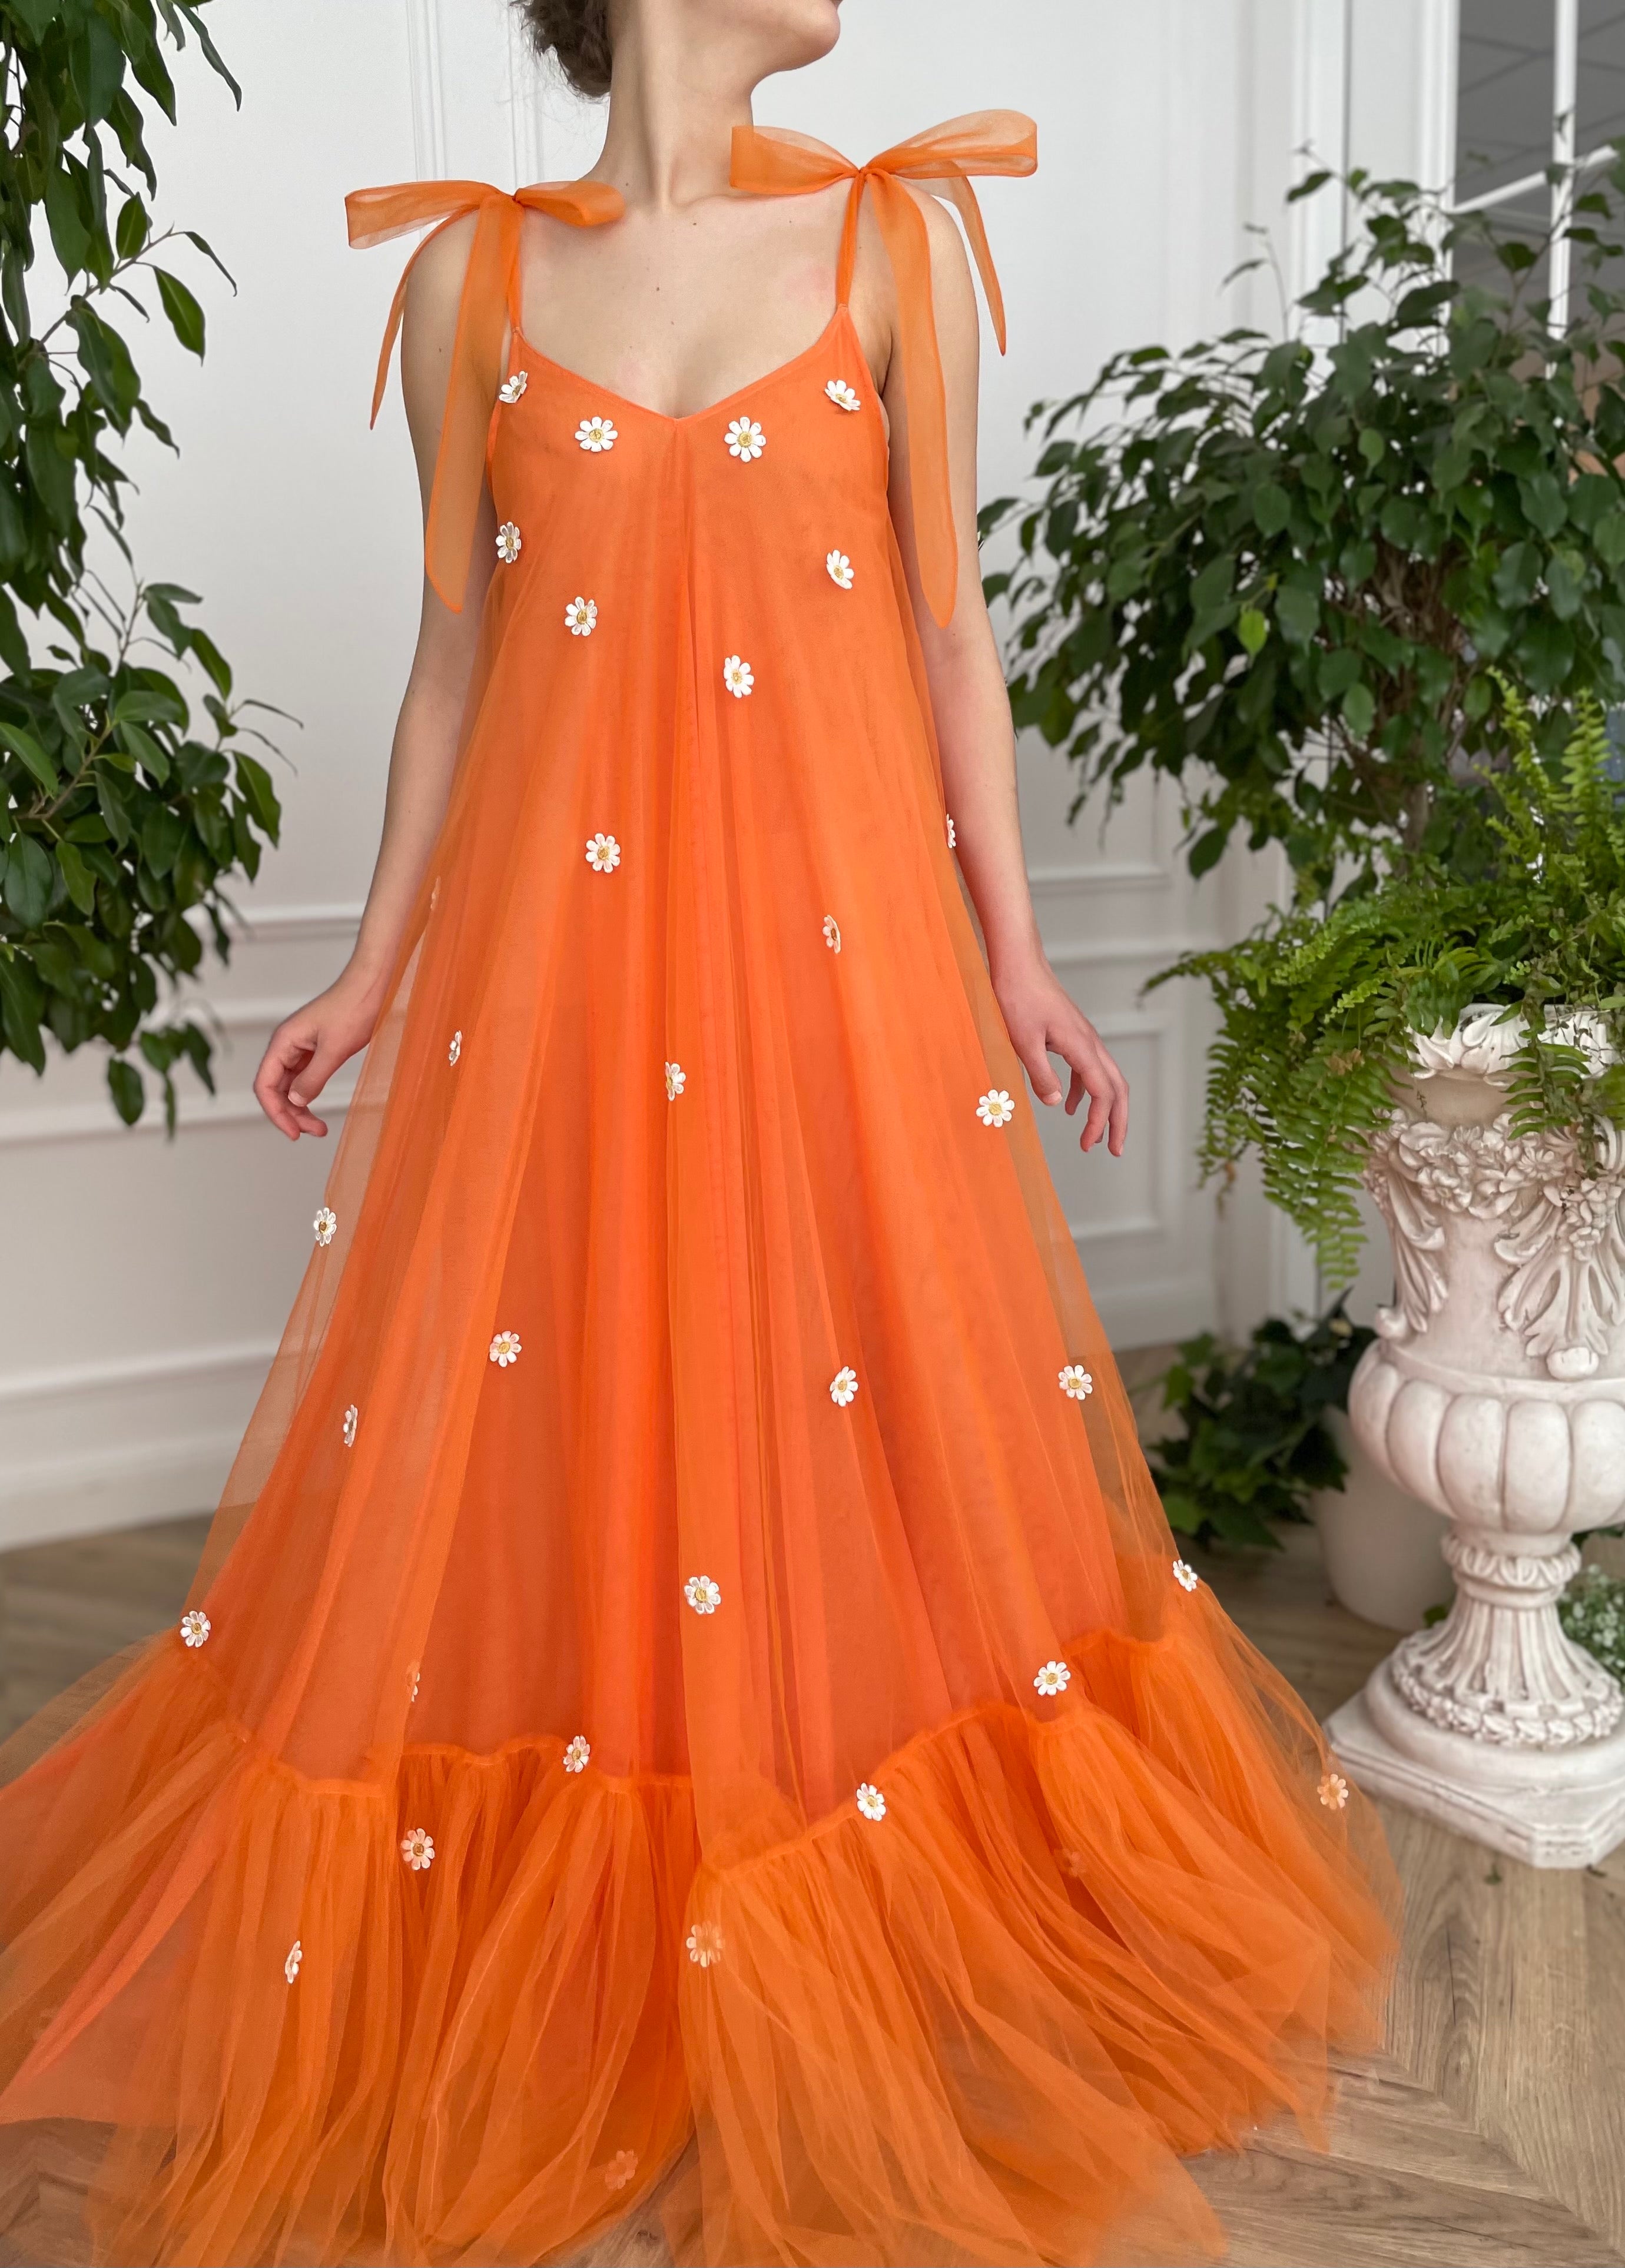 Orange sheath dress with embroidered daisies and bow straps